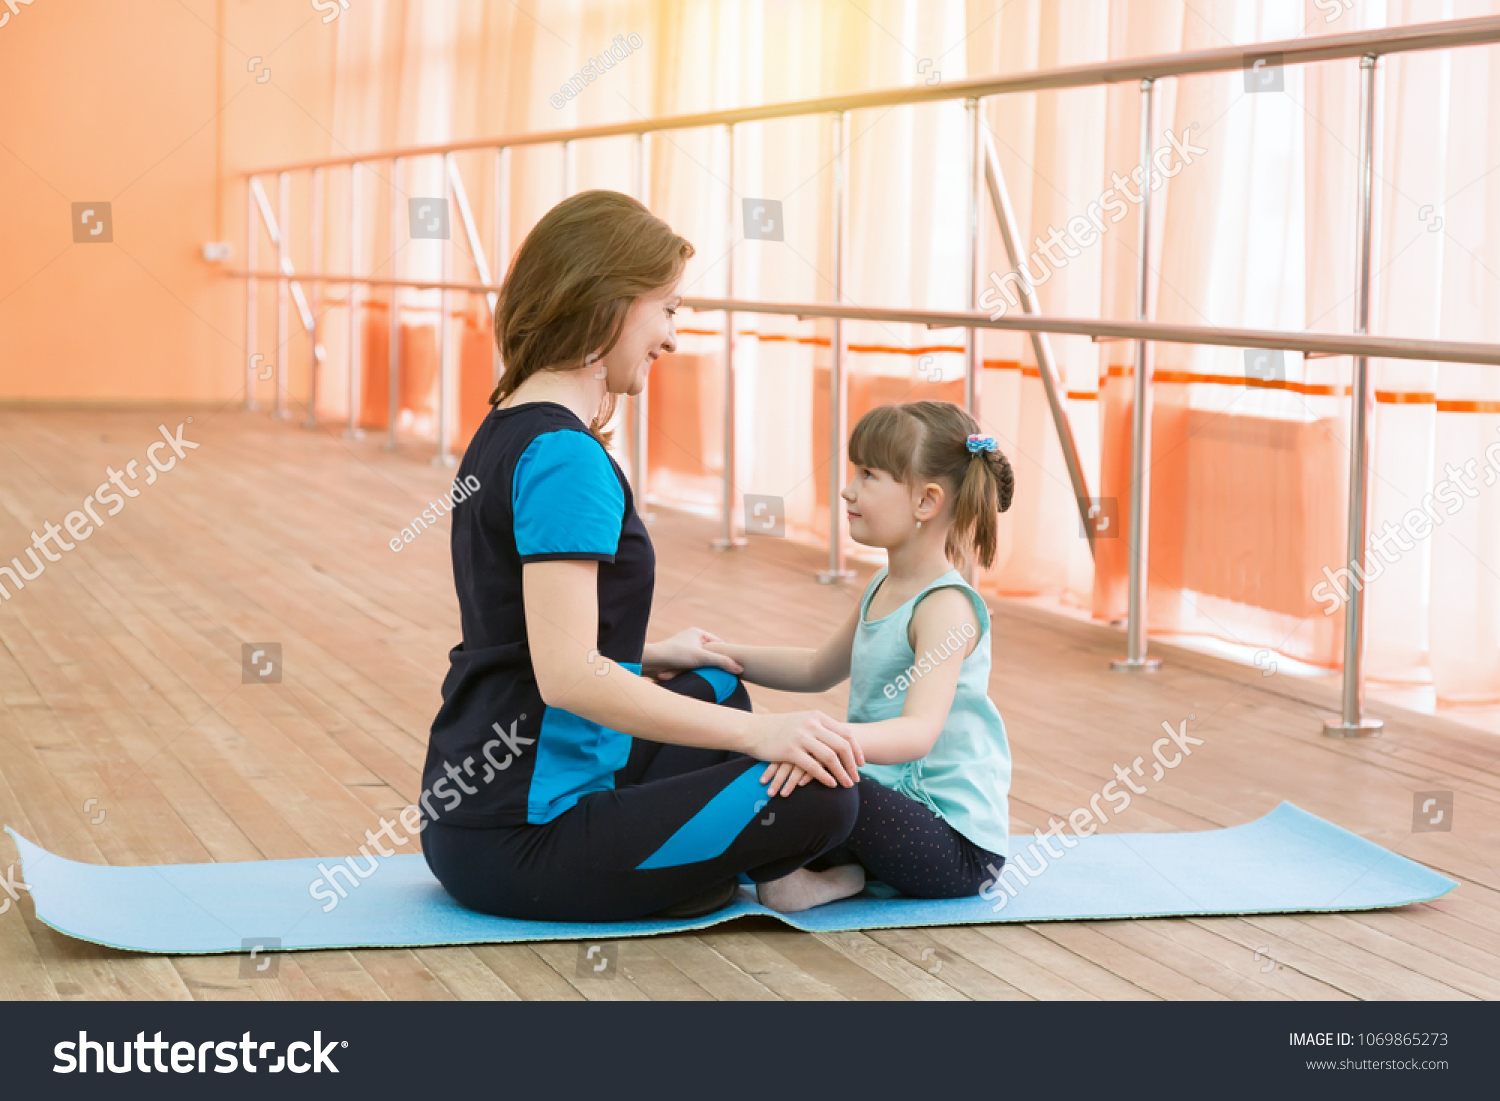 Doing sports with moms and daughters. Young woman and little girl are sitting opposite each other on a sports carpet. #1069865273